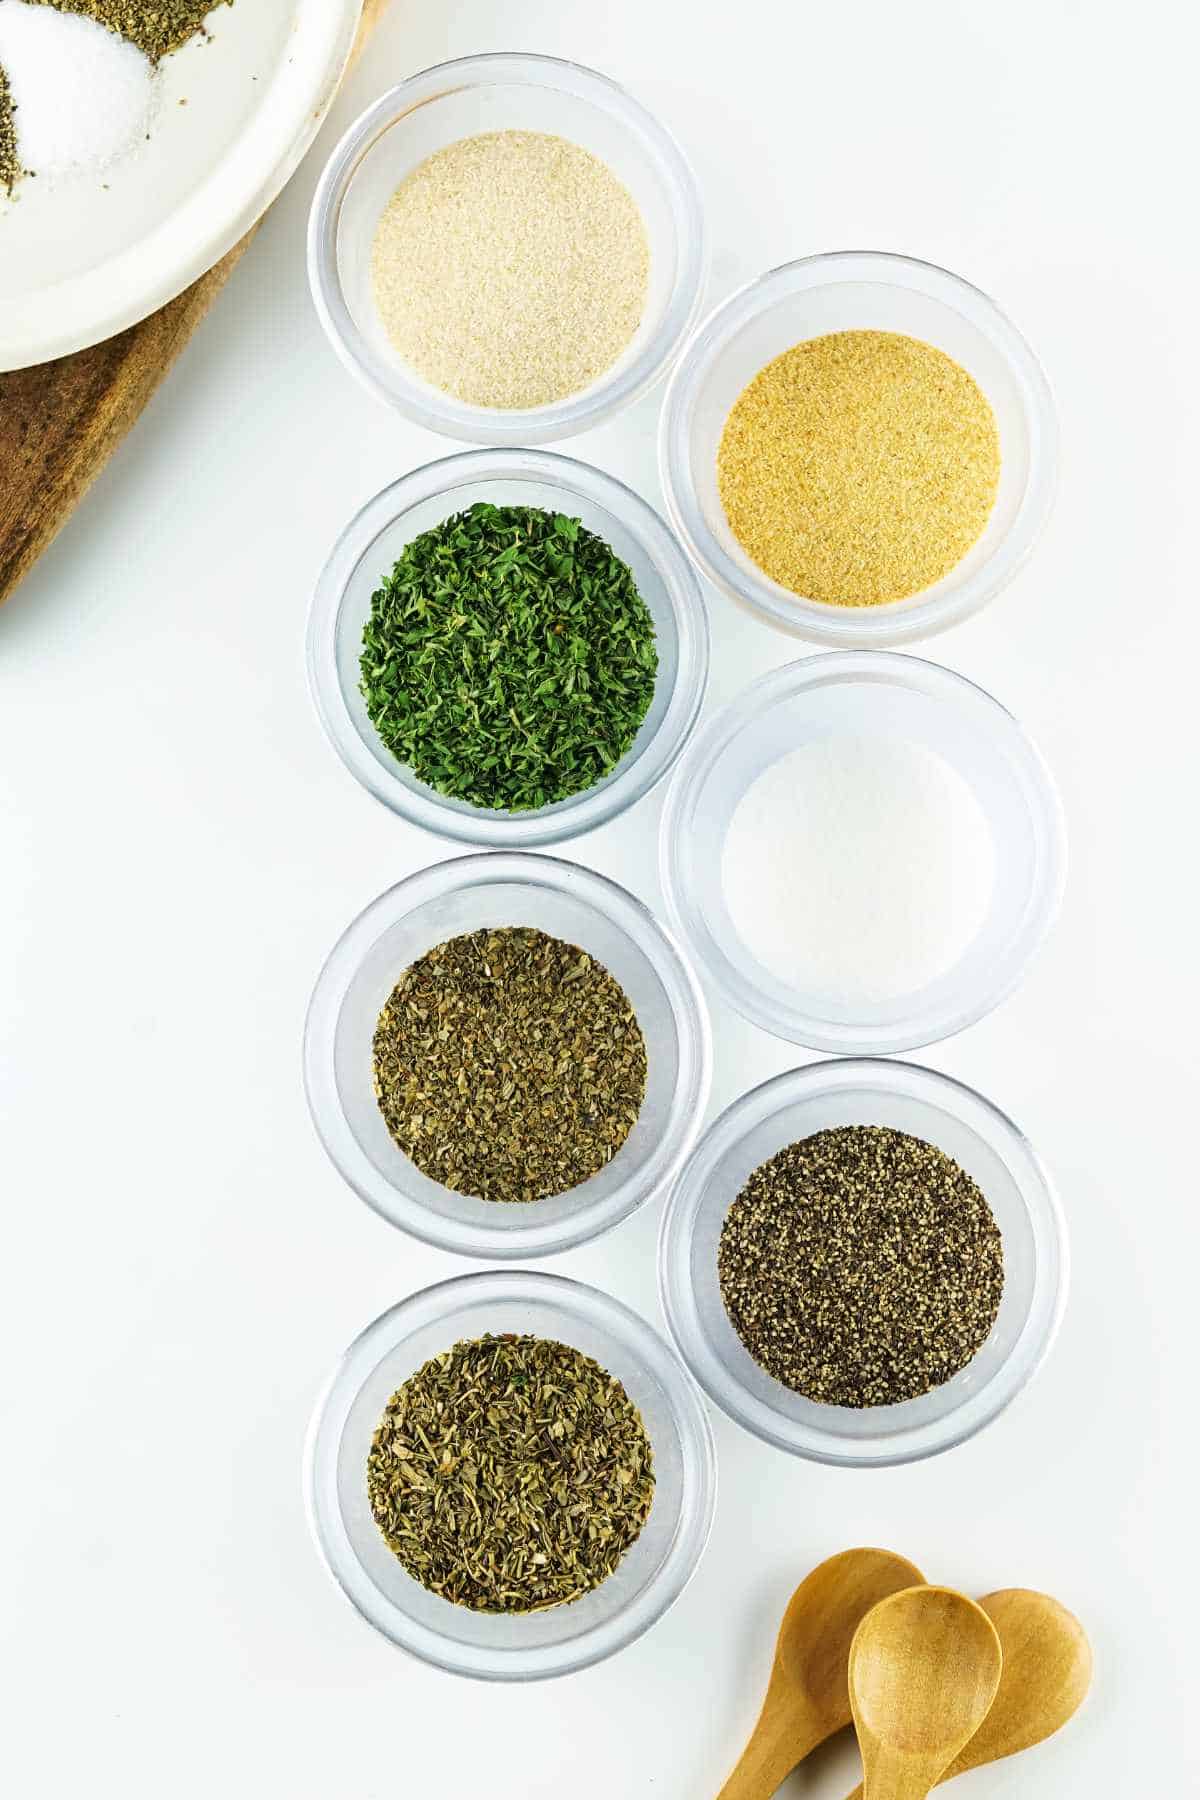 dried herbs and ground spices measured in small bowls for mixing a spice blend.